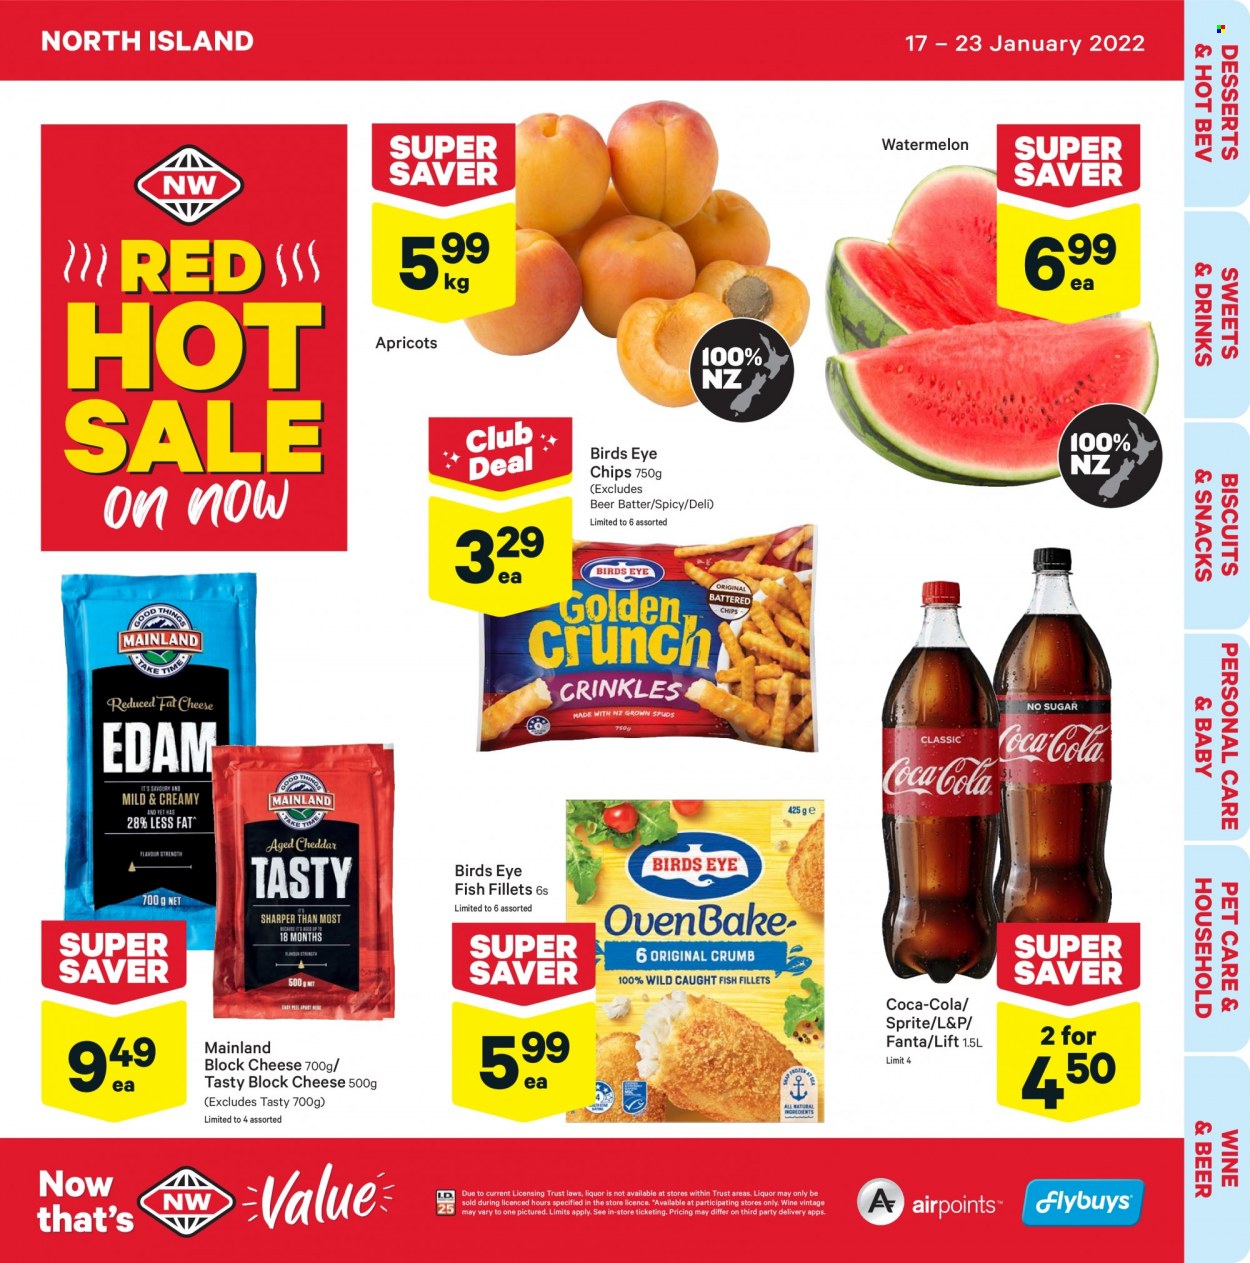 thumbnail - New World mailer - 17.01.2022 - 23.01.2022 - Sales products - watermelon, apricots, fish fillets, fish, Bird's Eye, cheese, snack, biscuit, chips, Coca-Cola, Sprite, Fanta, L&P, beer. Page 1.